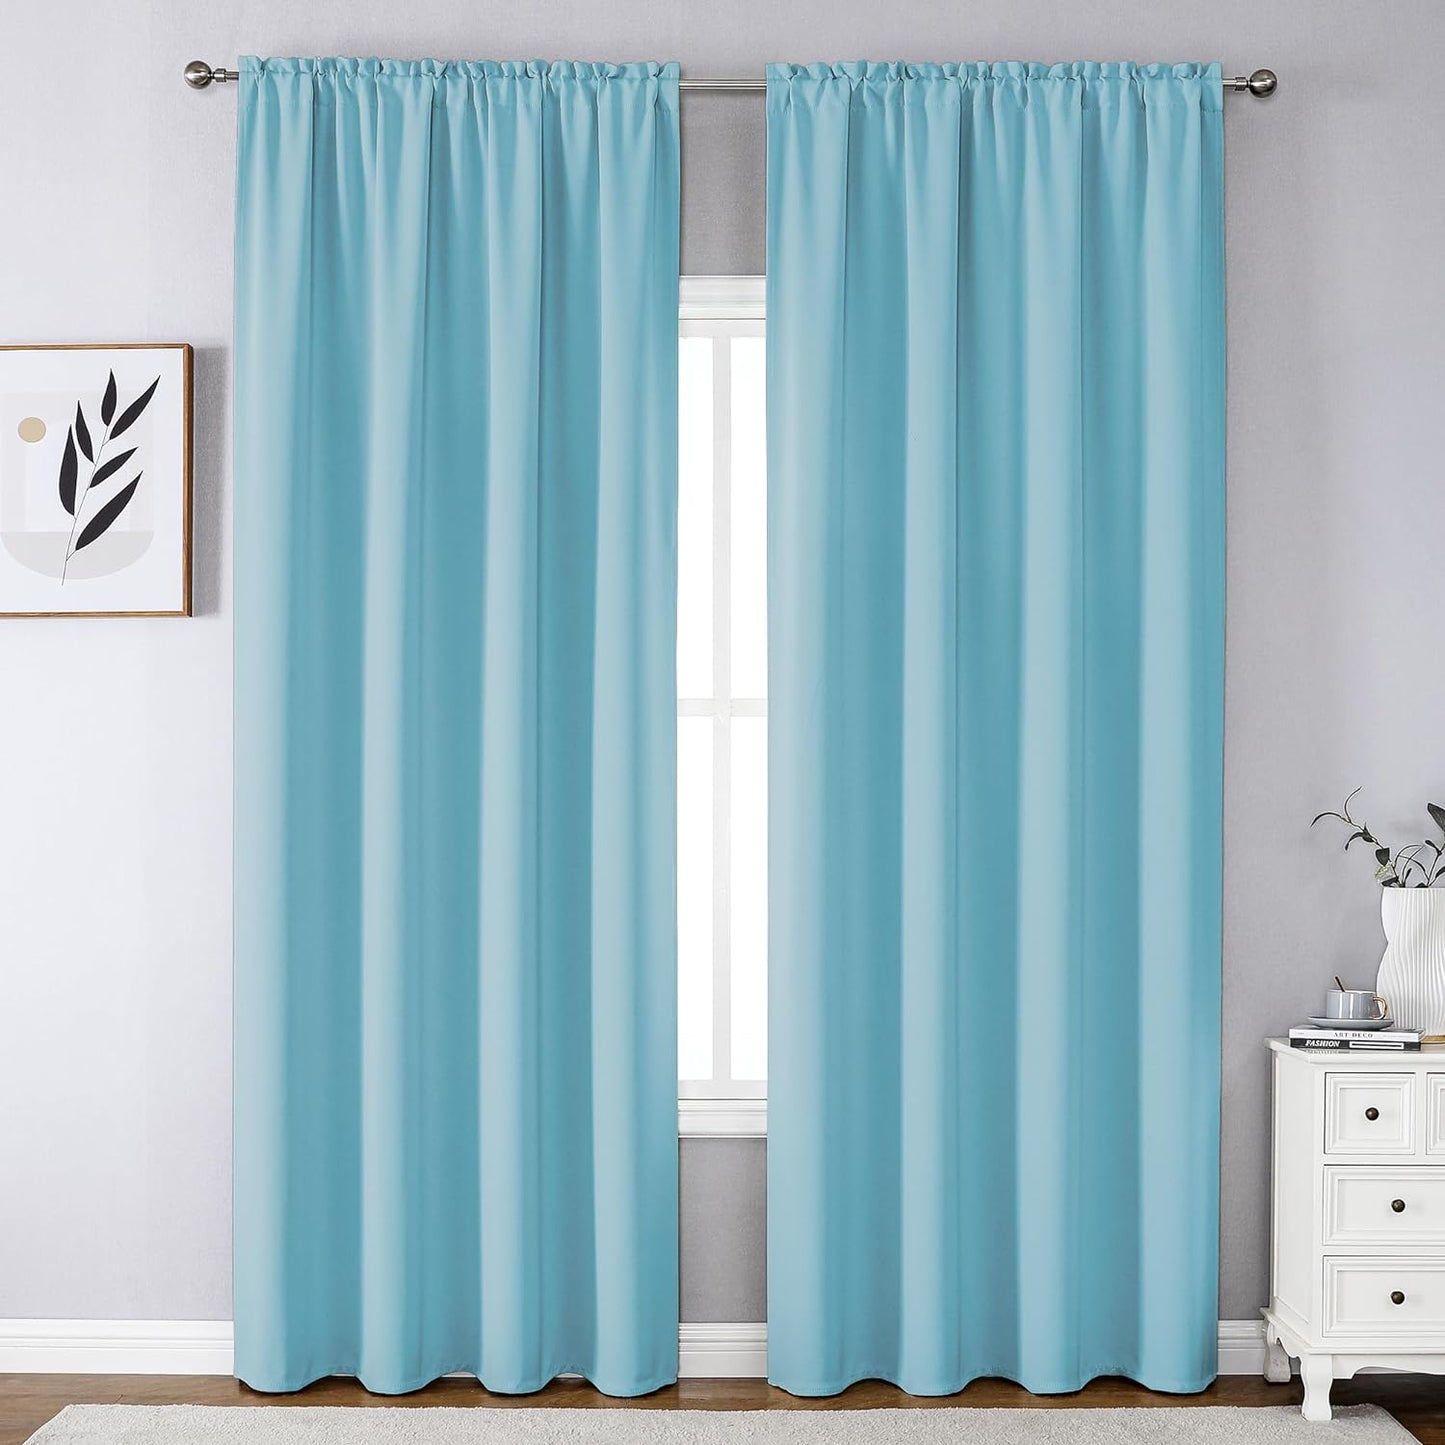 CUCRAF Blackout Curtains 84 Inches Long for Living Room, Light Beige Room Darkening Window Curtain Panels, Rod Pocket Thermal Insulated Solid Drapes for Bedroom, 52X84 Inch, Set of 2 Panels  CUCRAF Light Blue 52W X 95L Inch 2 Panels 